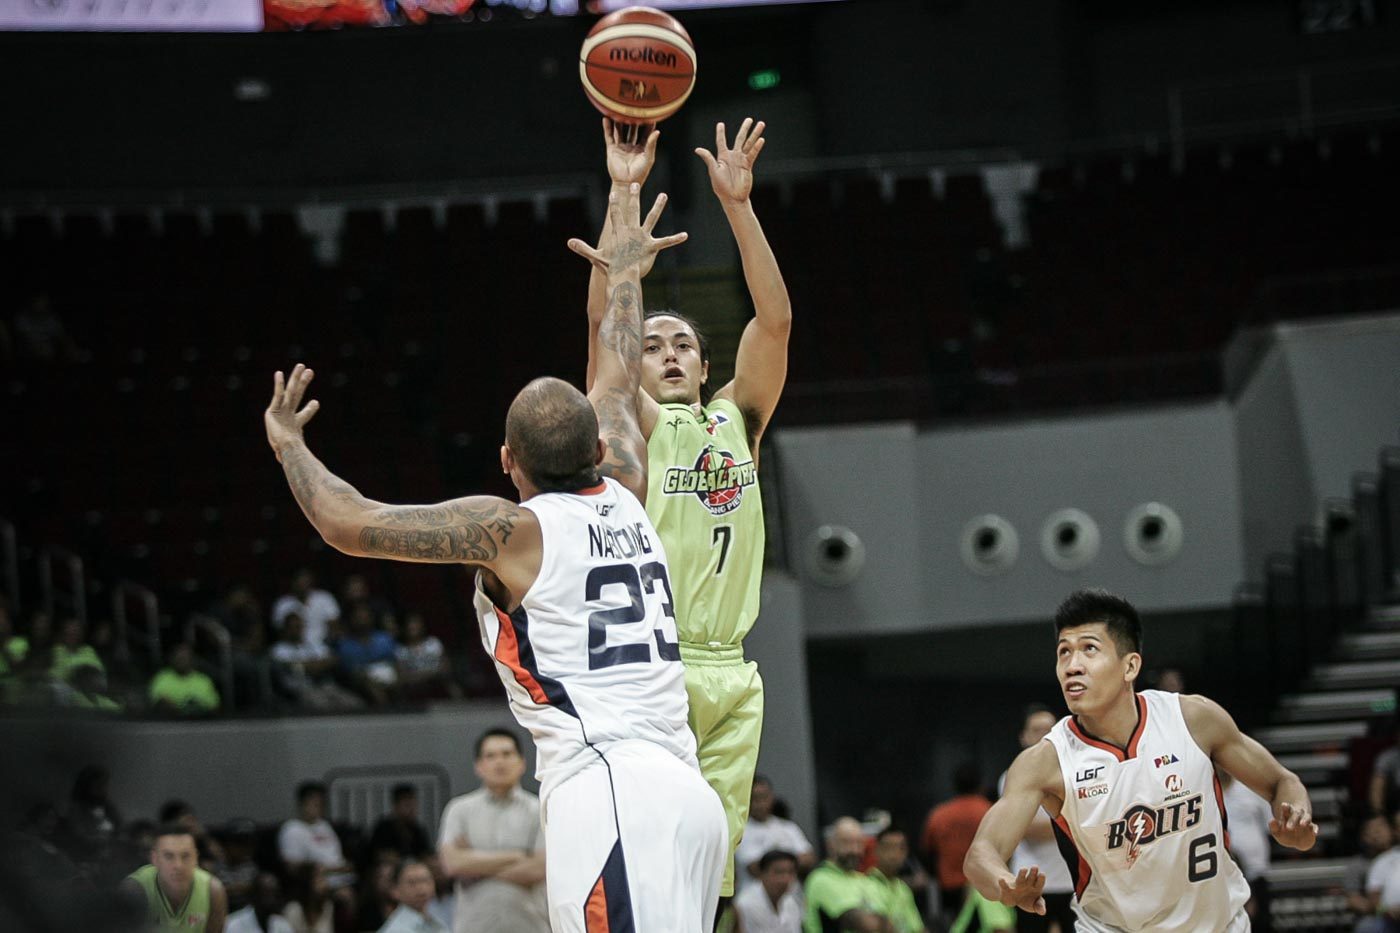 Terrence Romeo’s game continues to evolve